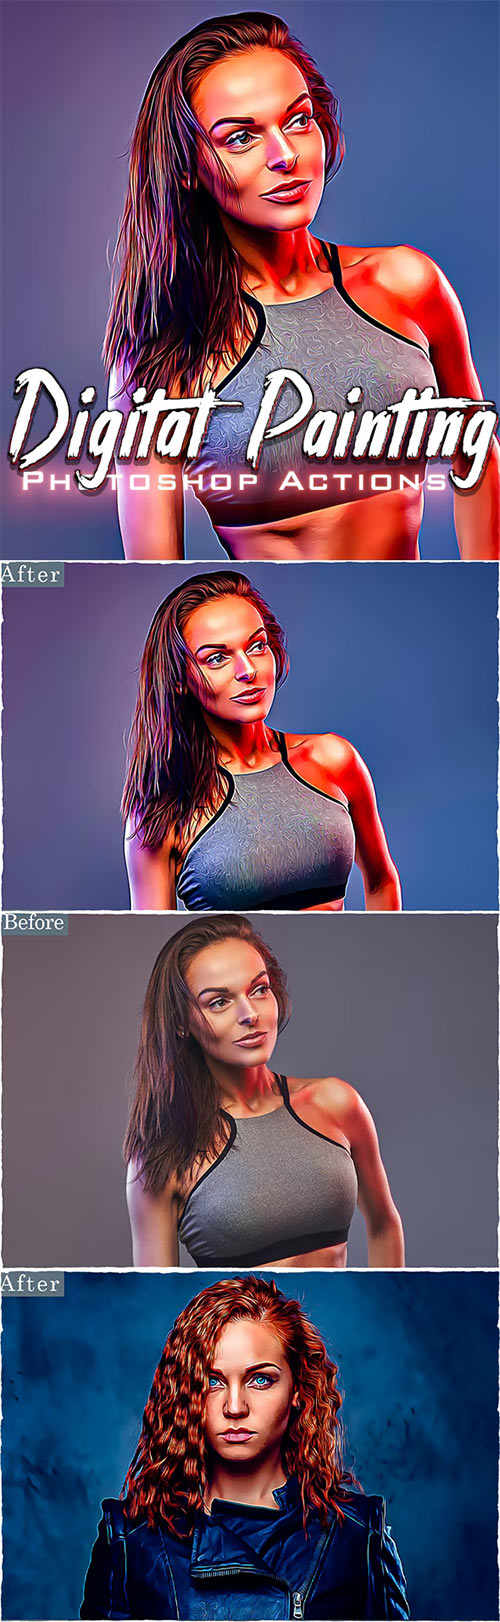 Digital Painting Photoshop Actions 37148191